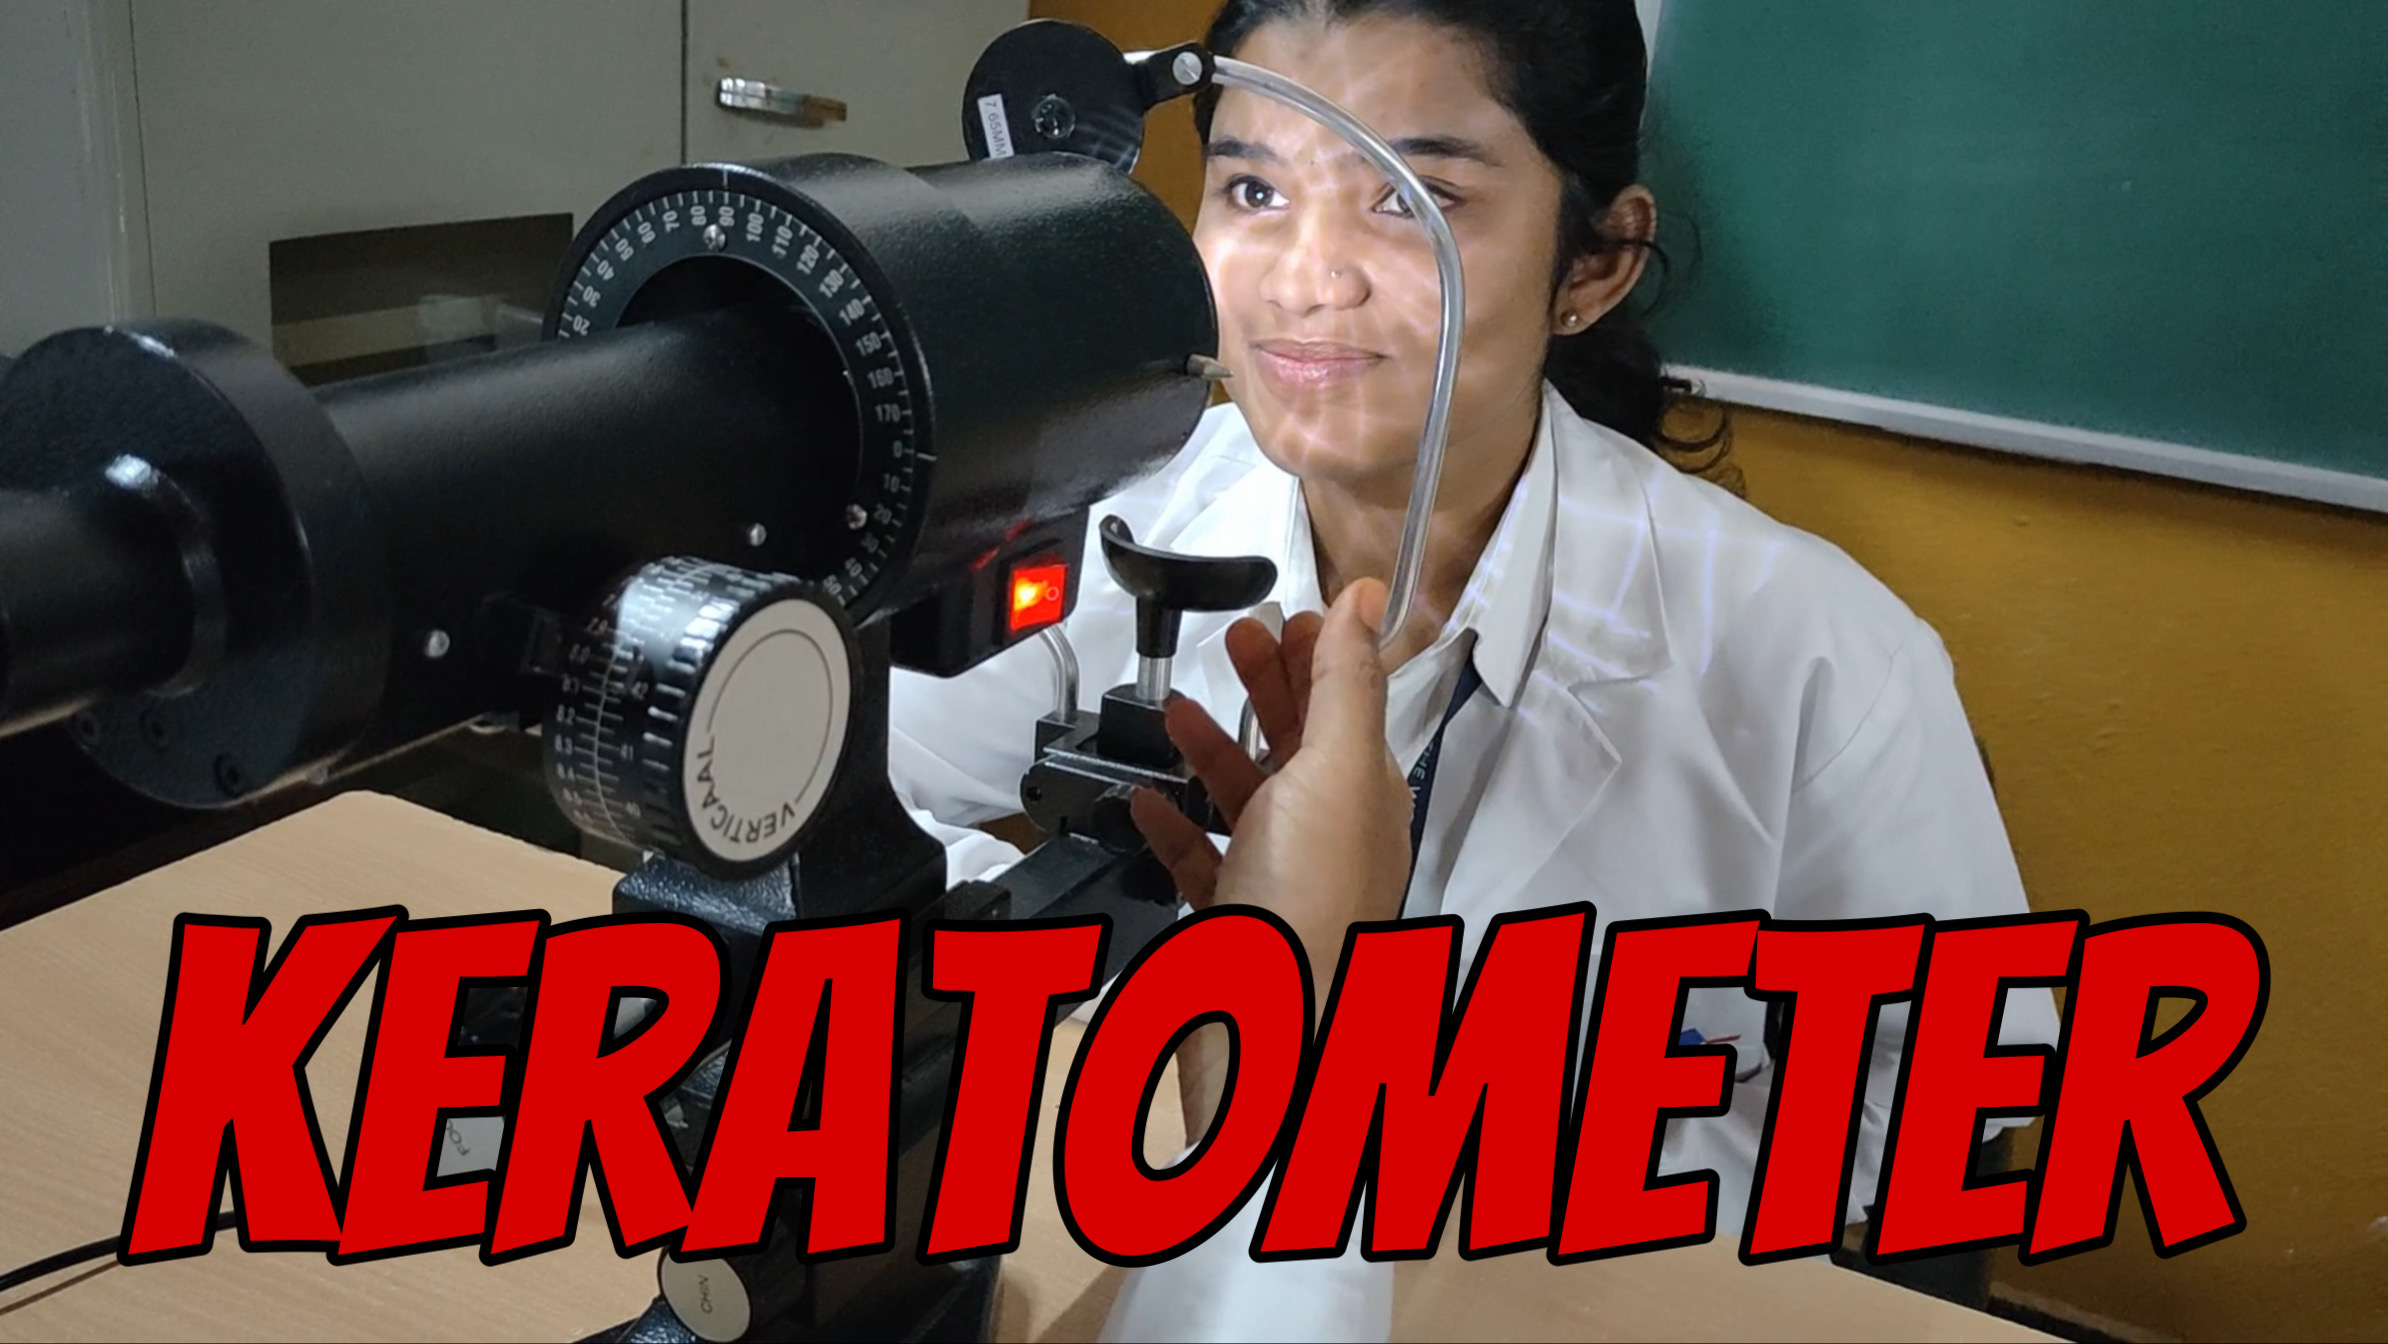 How to perform keratometer